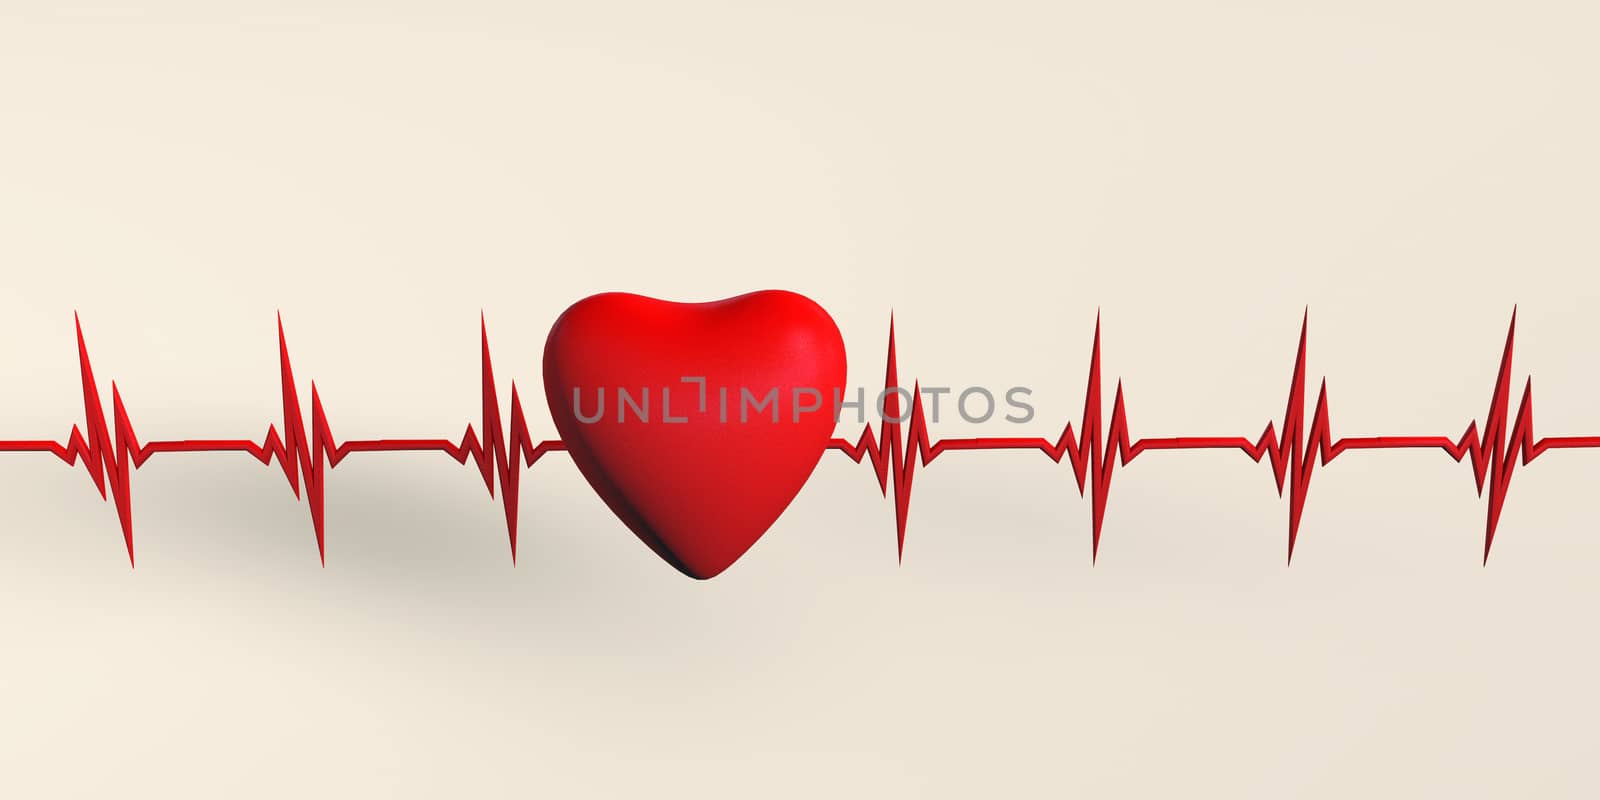 A heart shape with beating pulse. Life, health, Heart disease prevention or Medical Care concept. 3D rendered isolated on white background.